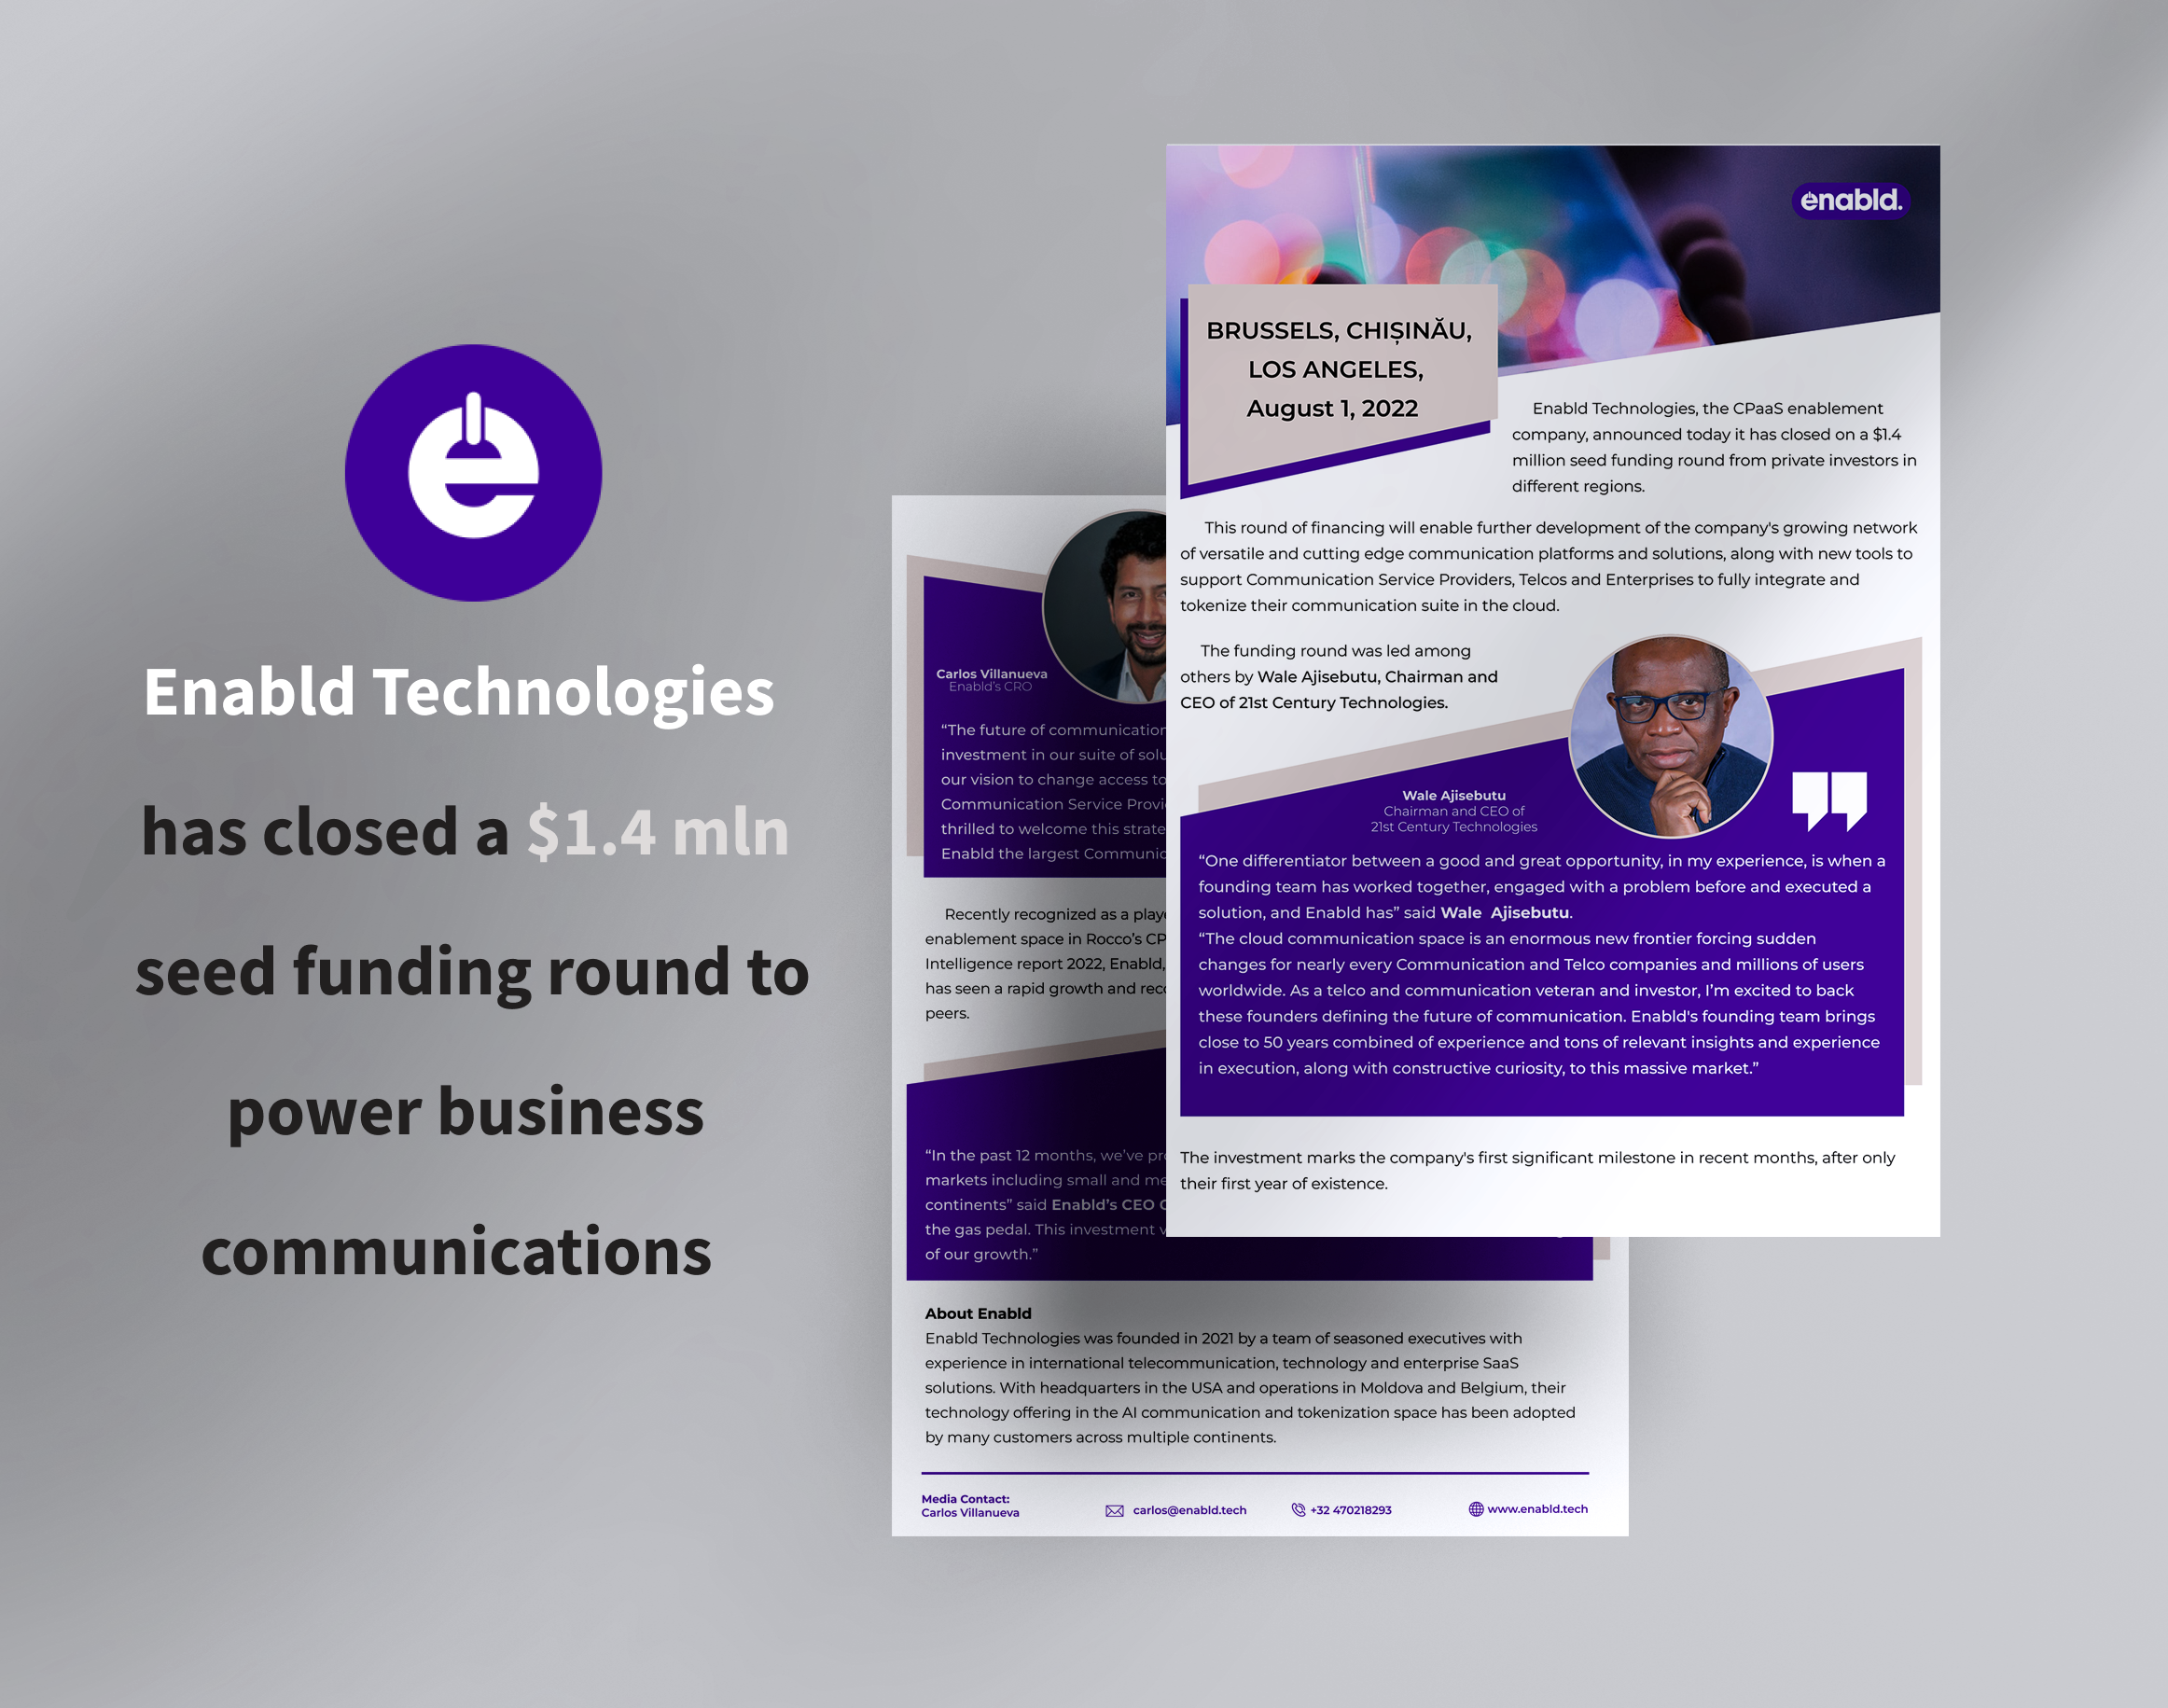 Enabld has closed a $1.4 million seed funding round to power business communications